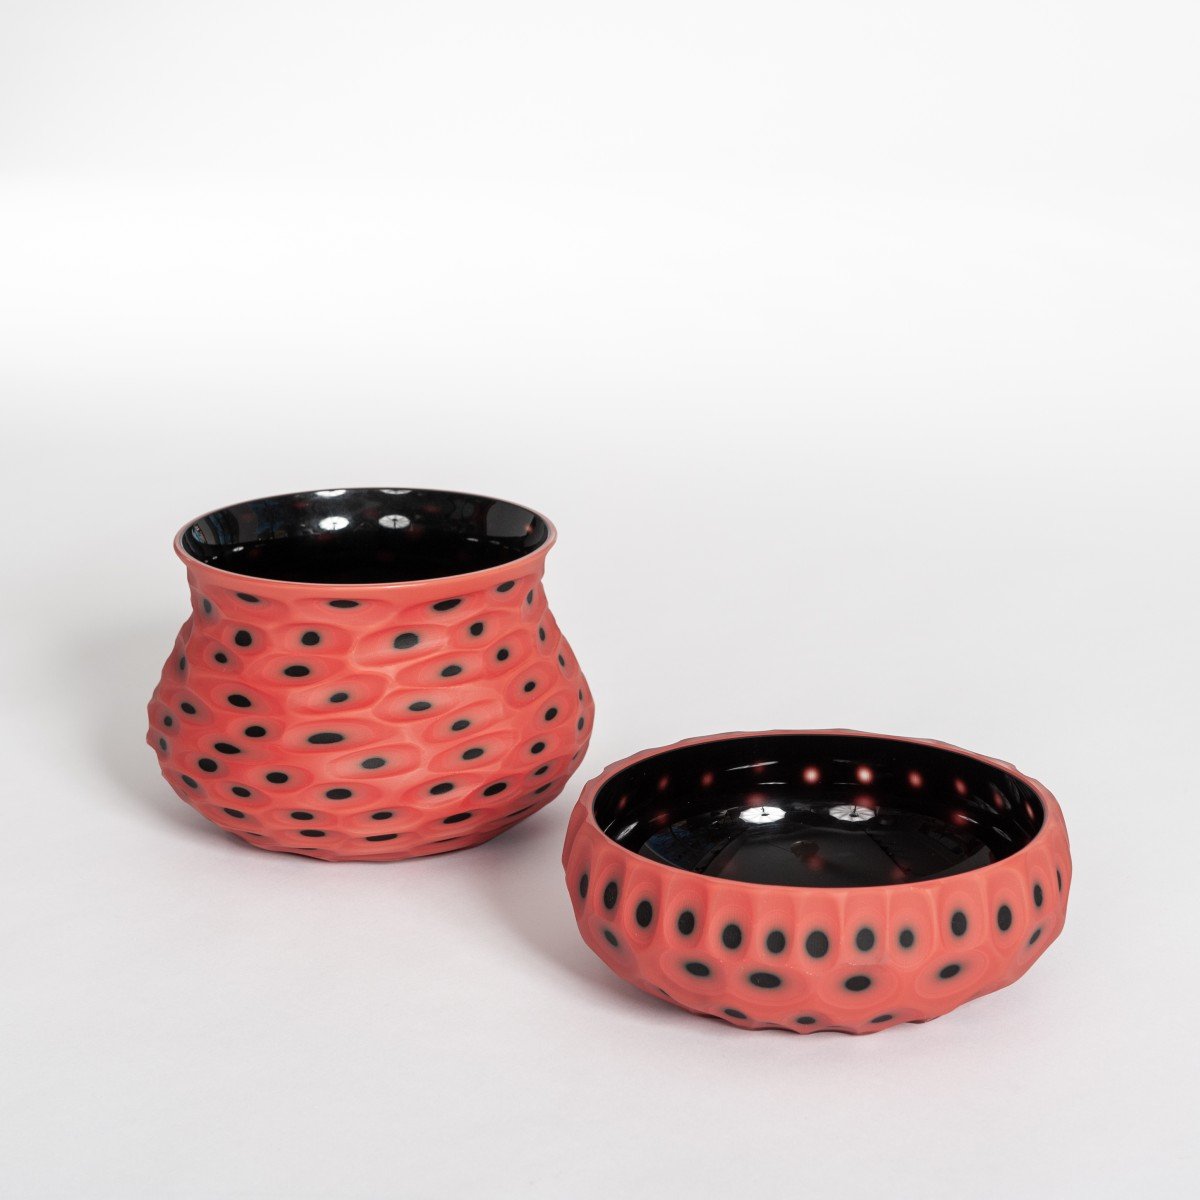 Pair Of Very Decorative Murano Glass Bowls In The Colors Coral-black With Matt Surface And Battuto Decor By Afro Celotto